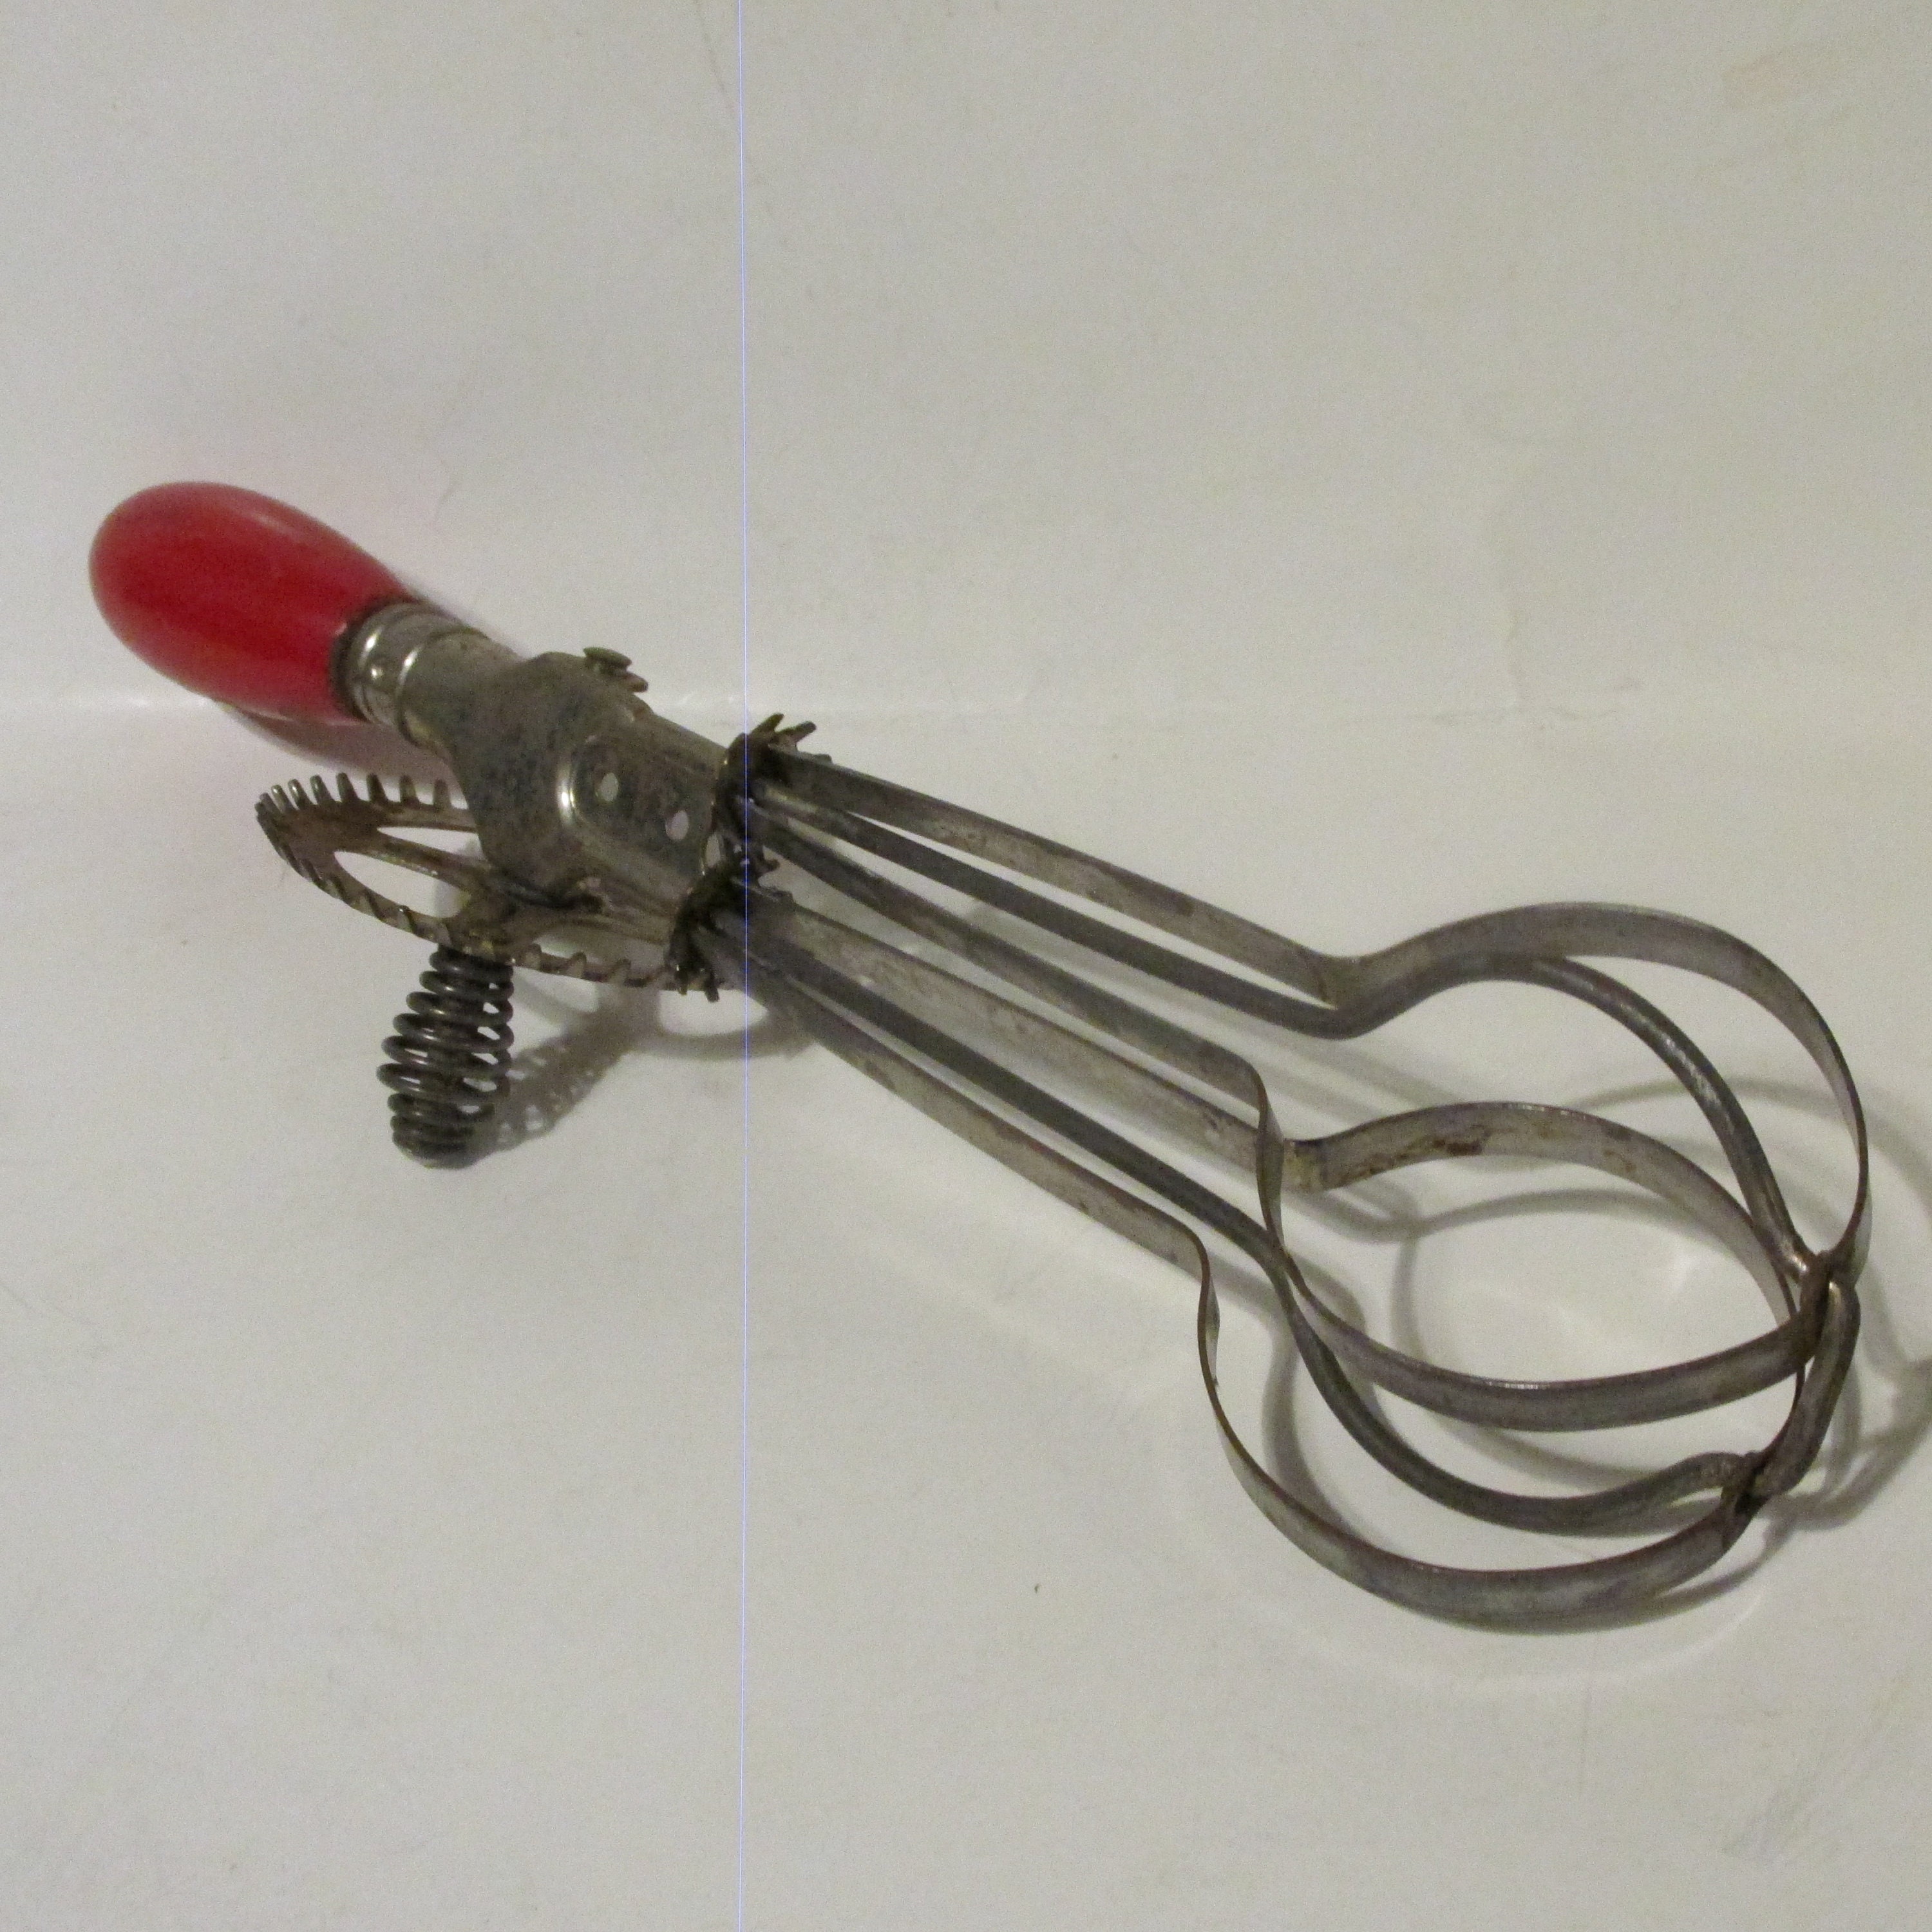 Vintage Hand Mixer Replacement Beaters Chrome 7” Metal Blades Beaters Only